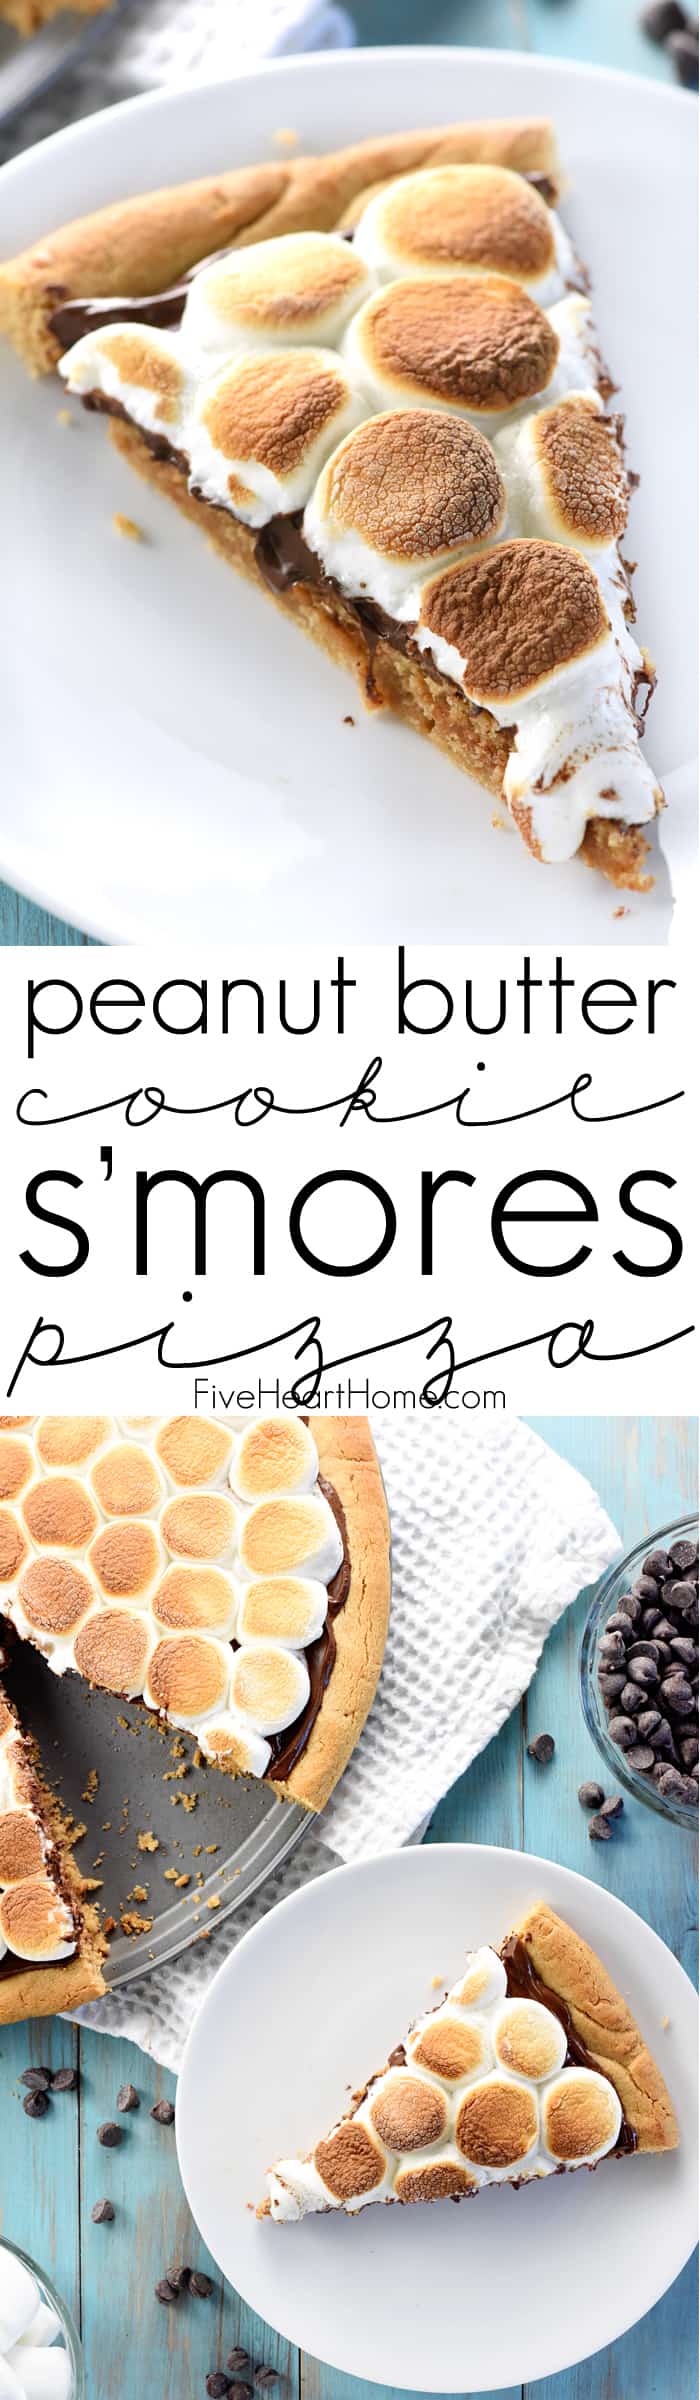 Peanut Butter Cookie S'mores Pizza ~ melted chocolate and toasted marshmallows top a thick, chewy, homemade peanut butter crust in this fun and decadent dessert recipe that's perfect for summer parties or year-round special occasions! | FiveHeartHome.com via @fivehearthome